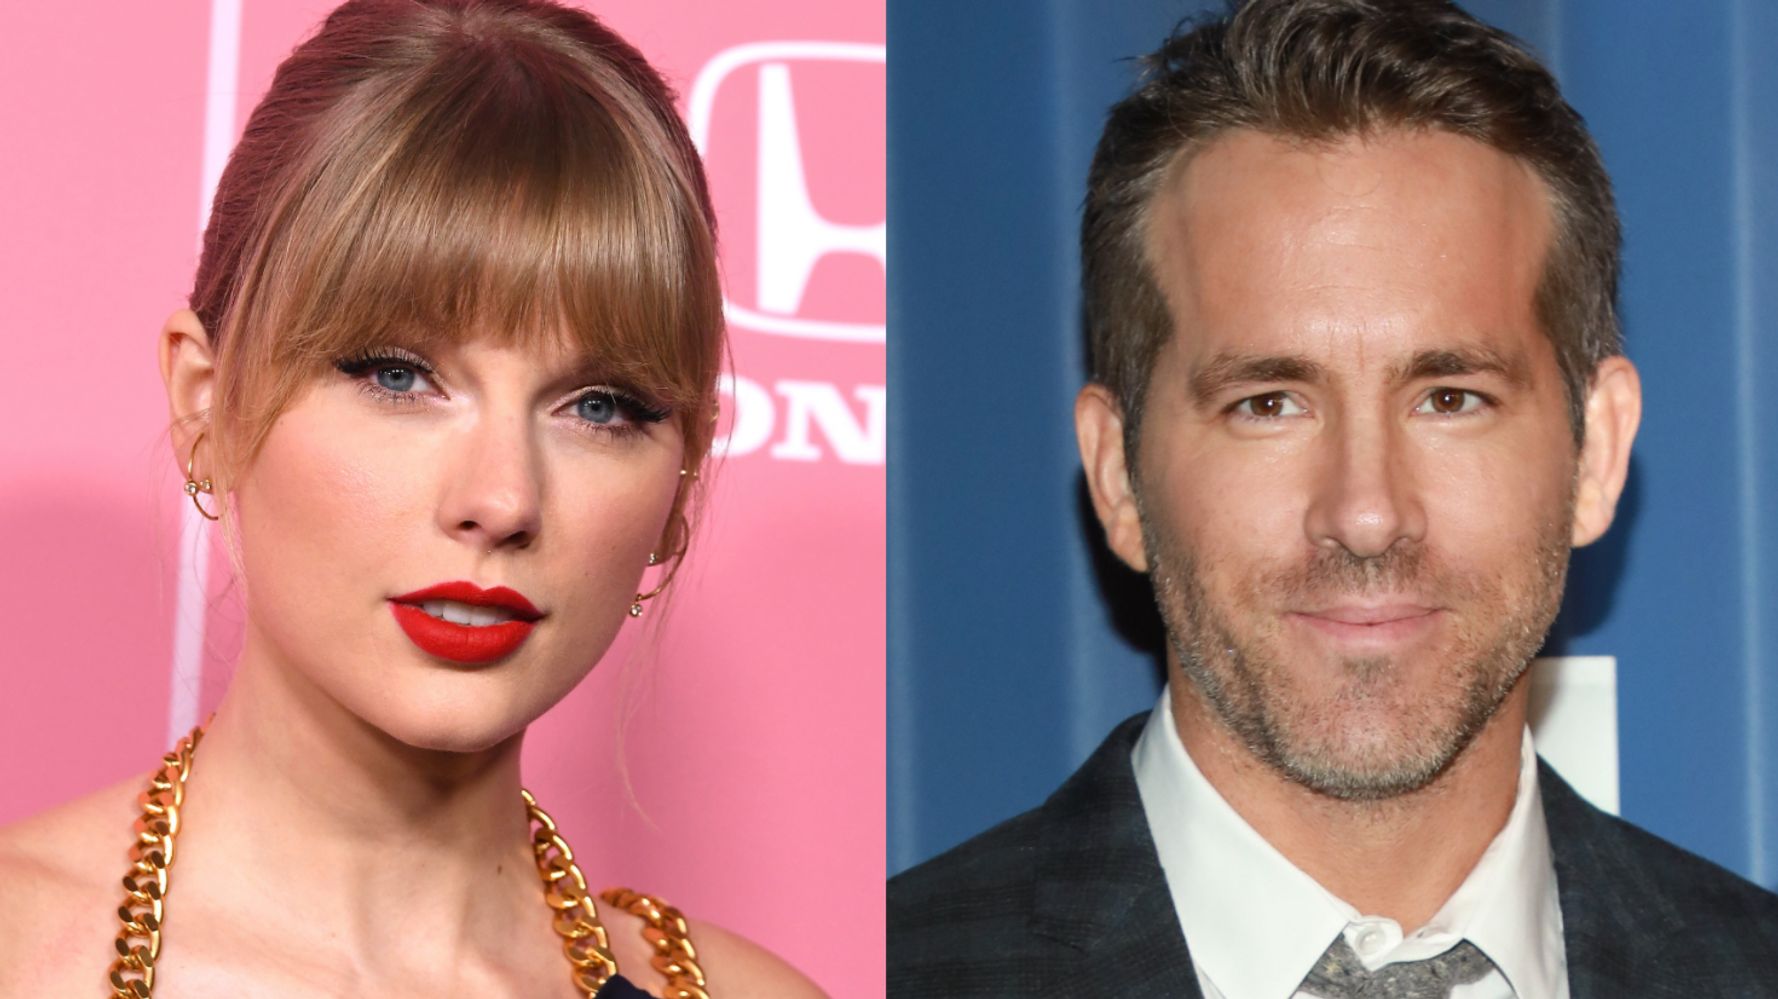 Taylor Swift Teams Up With Ryan Reynolds To Debut New Version Of ‘Love Story’